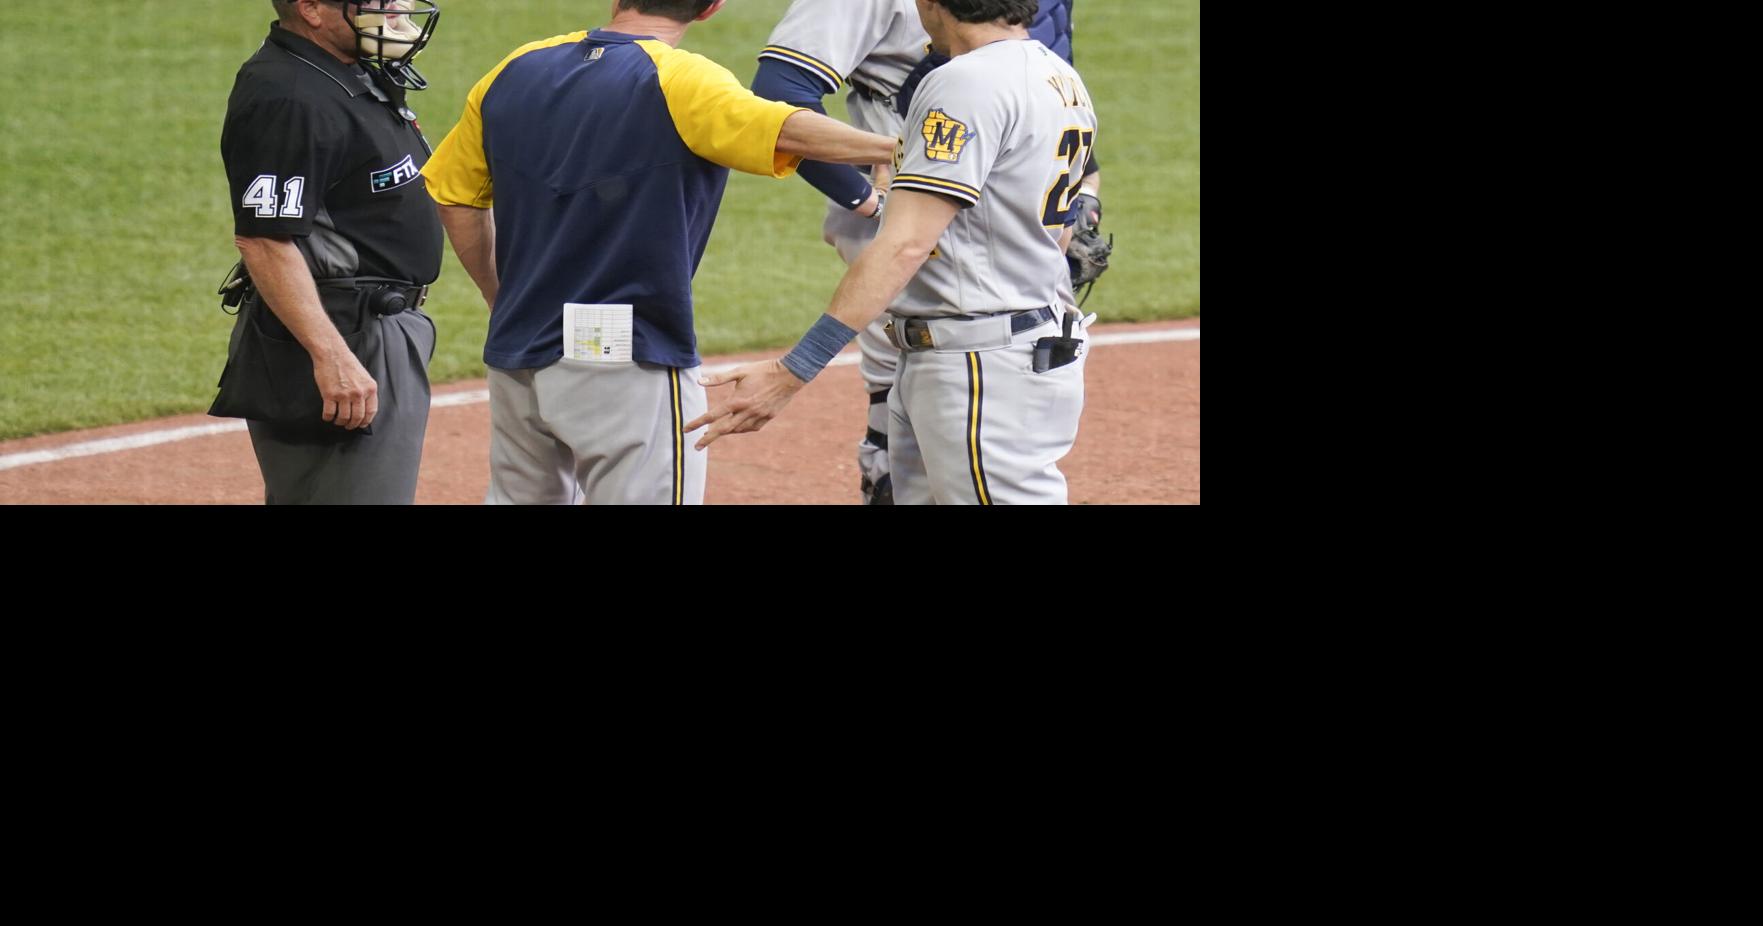 Brewers' Willy Adames exits game, hospitalized after being hit by